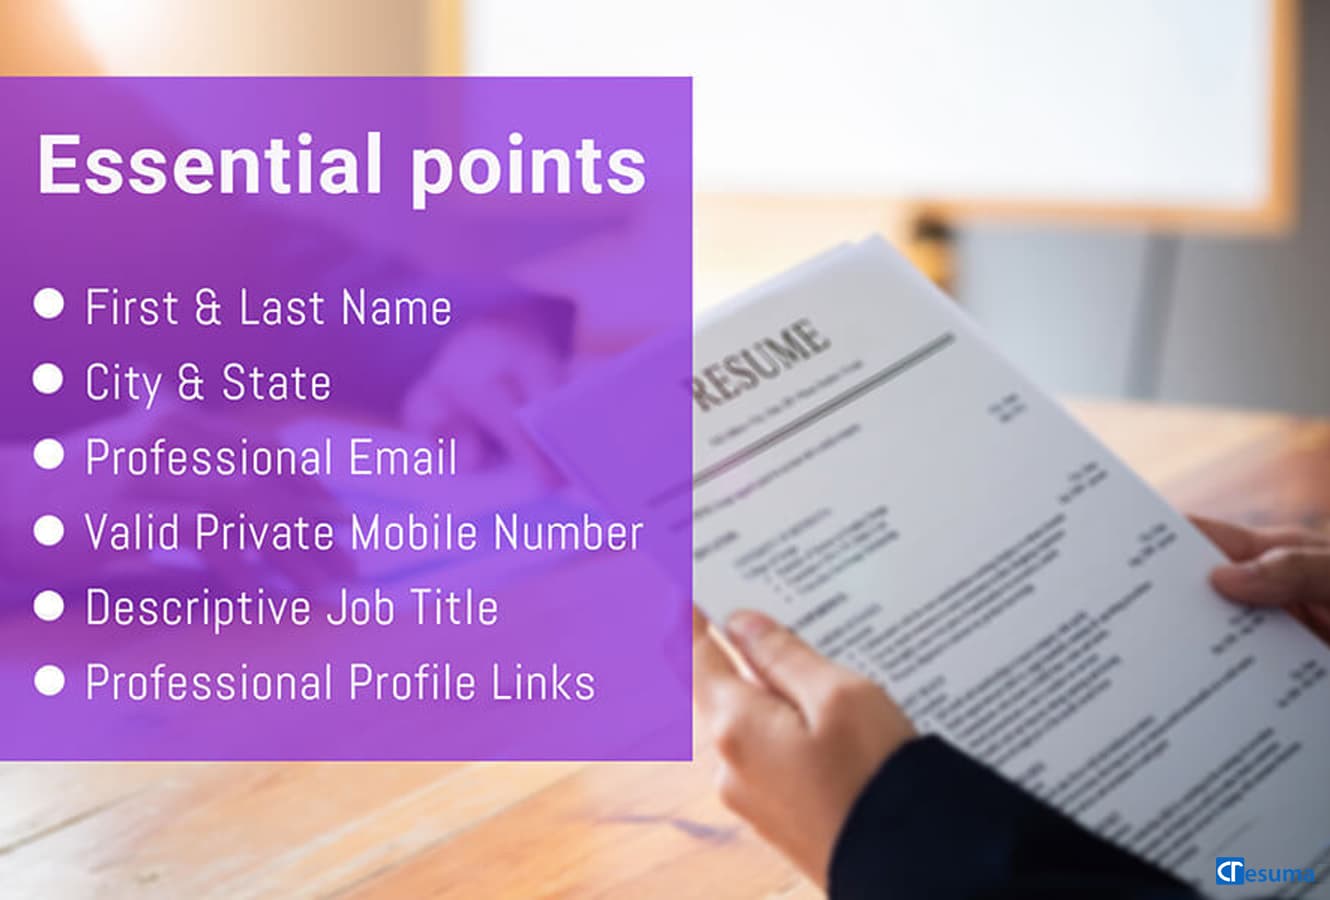  The most essential points for a sap consultant resume header